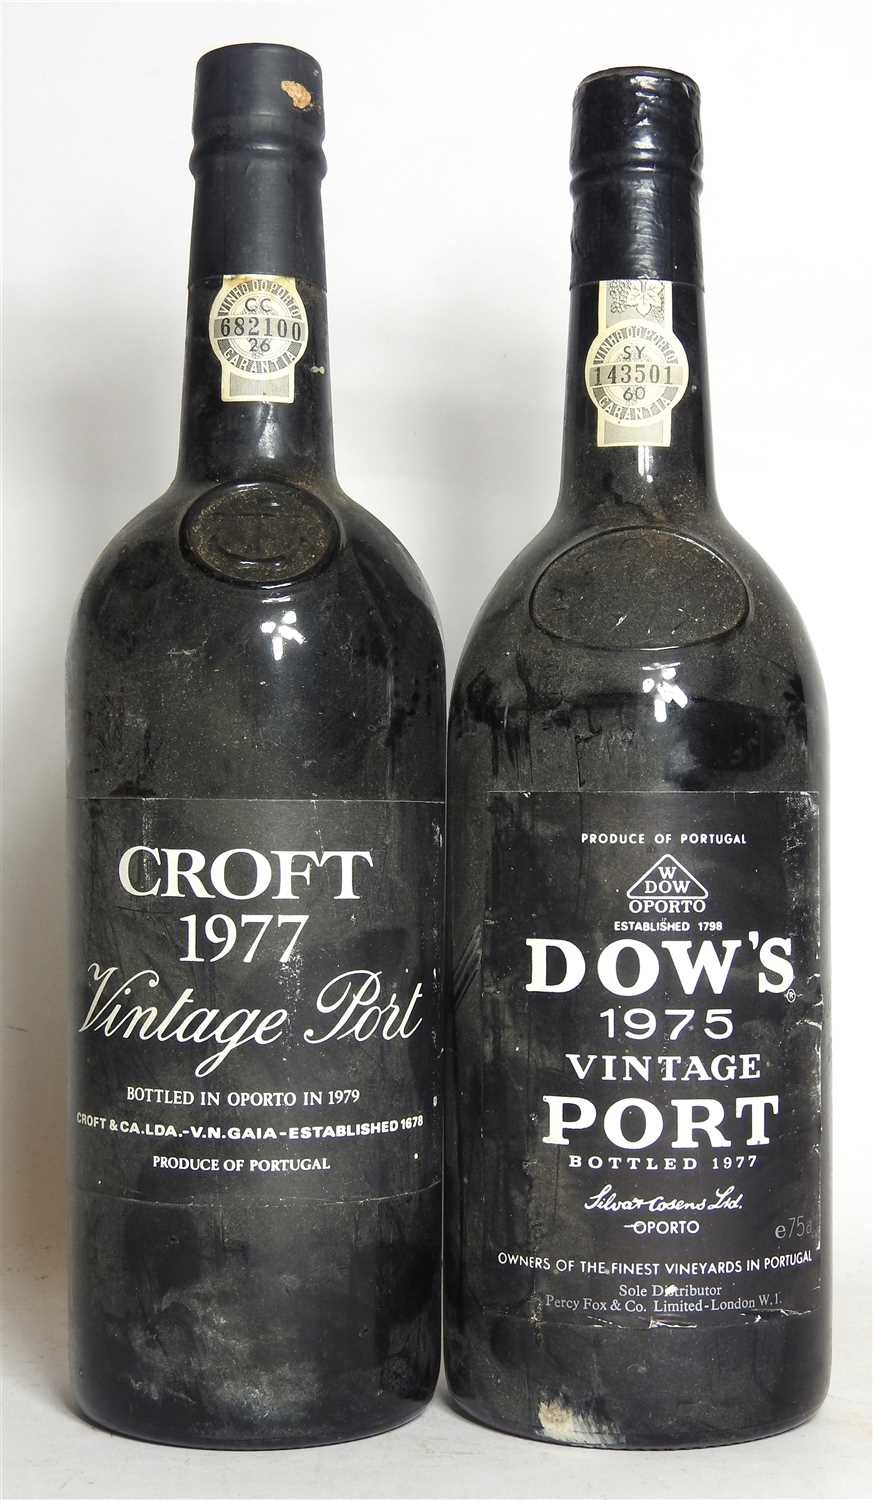 Lot 121 - Assorted port to include: Croft, 1977, one bottle and Dow's, 1975, one bottle, two bottles in total